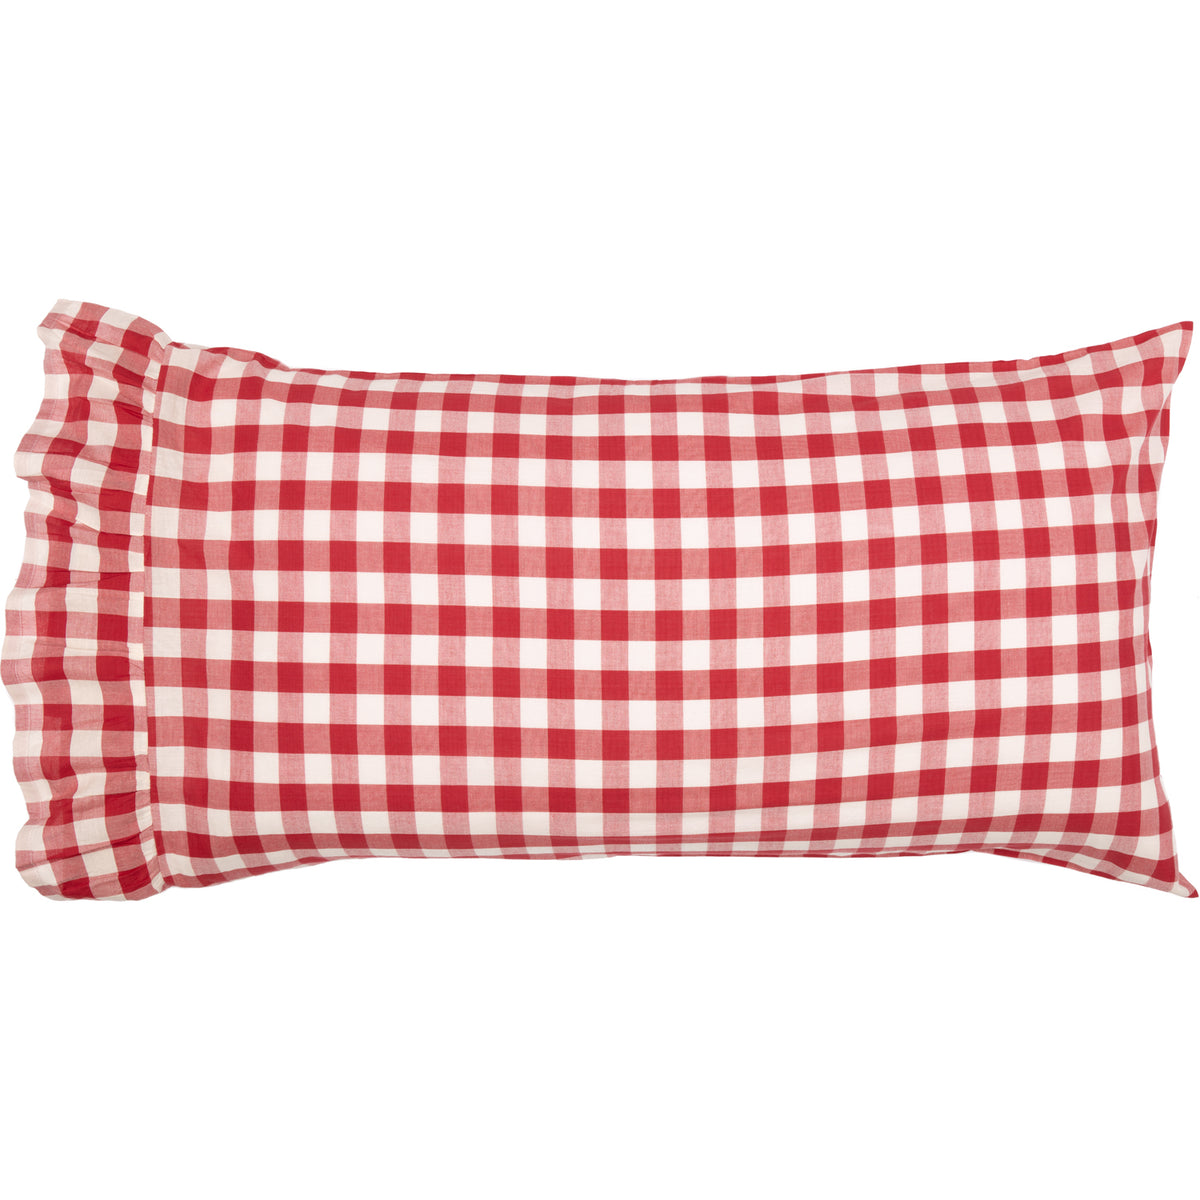 April & Olive Annie Buffalo Red Check King Pillow Case Set of 2 21x36+4 By VHC Brands